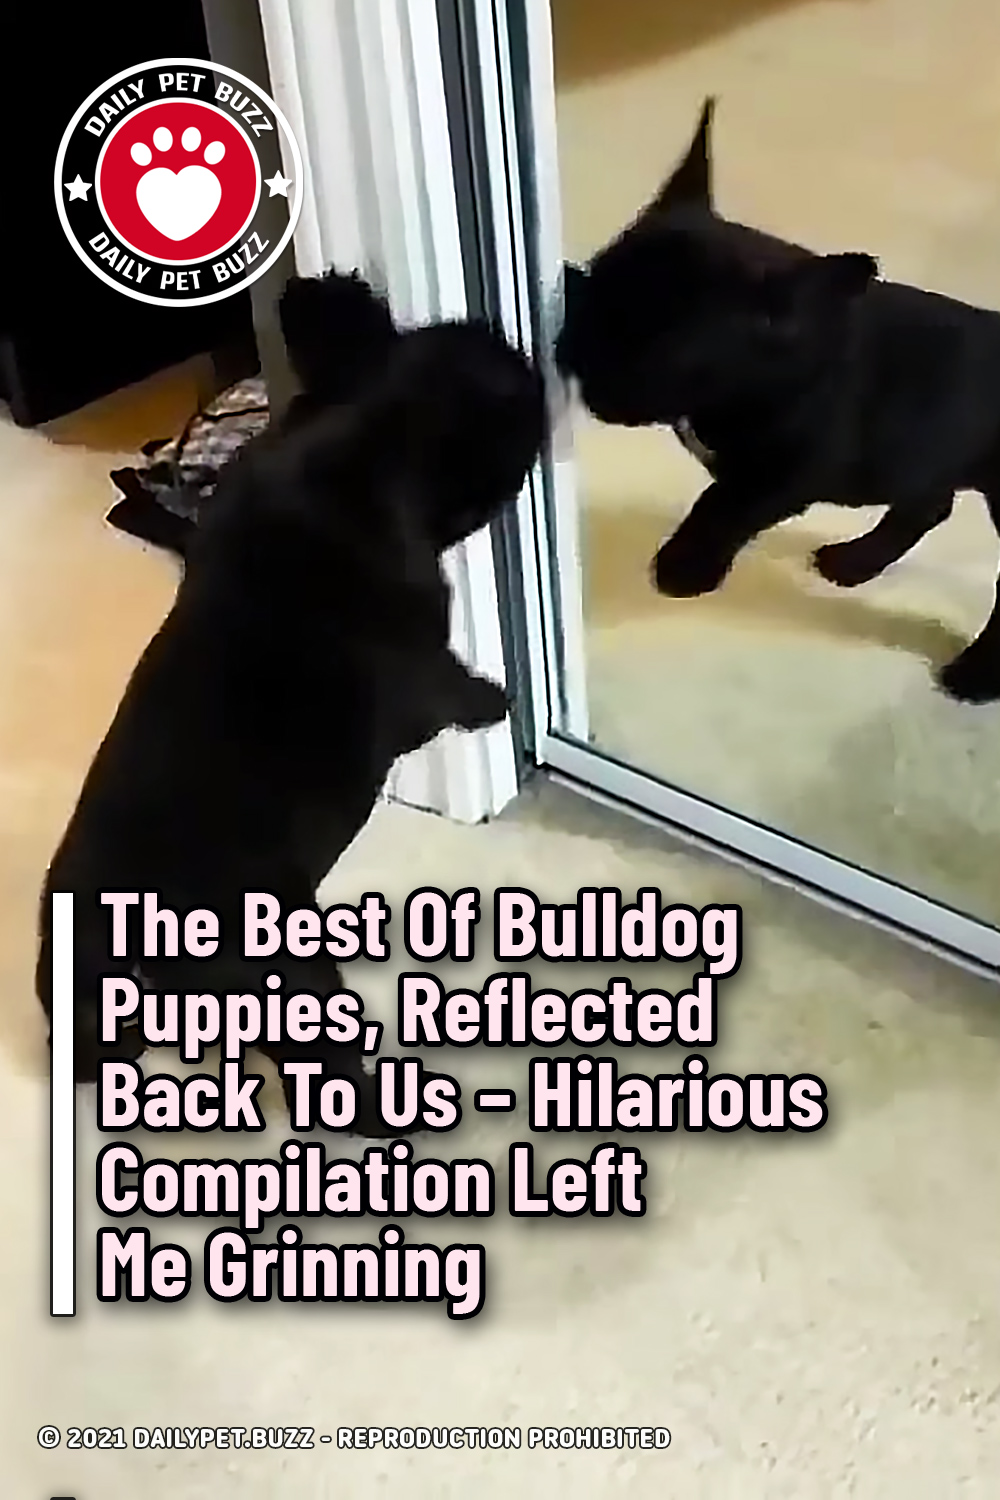 The Best Of Bulldog Puppies, Reflected Back To Us – Hilarious Compilation Left Me Grinning